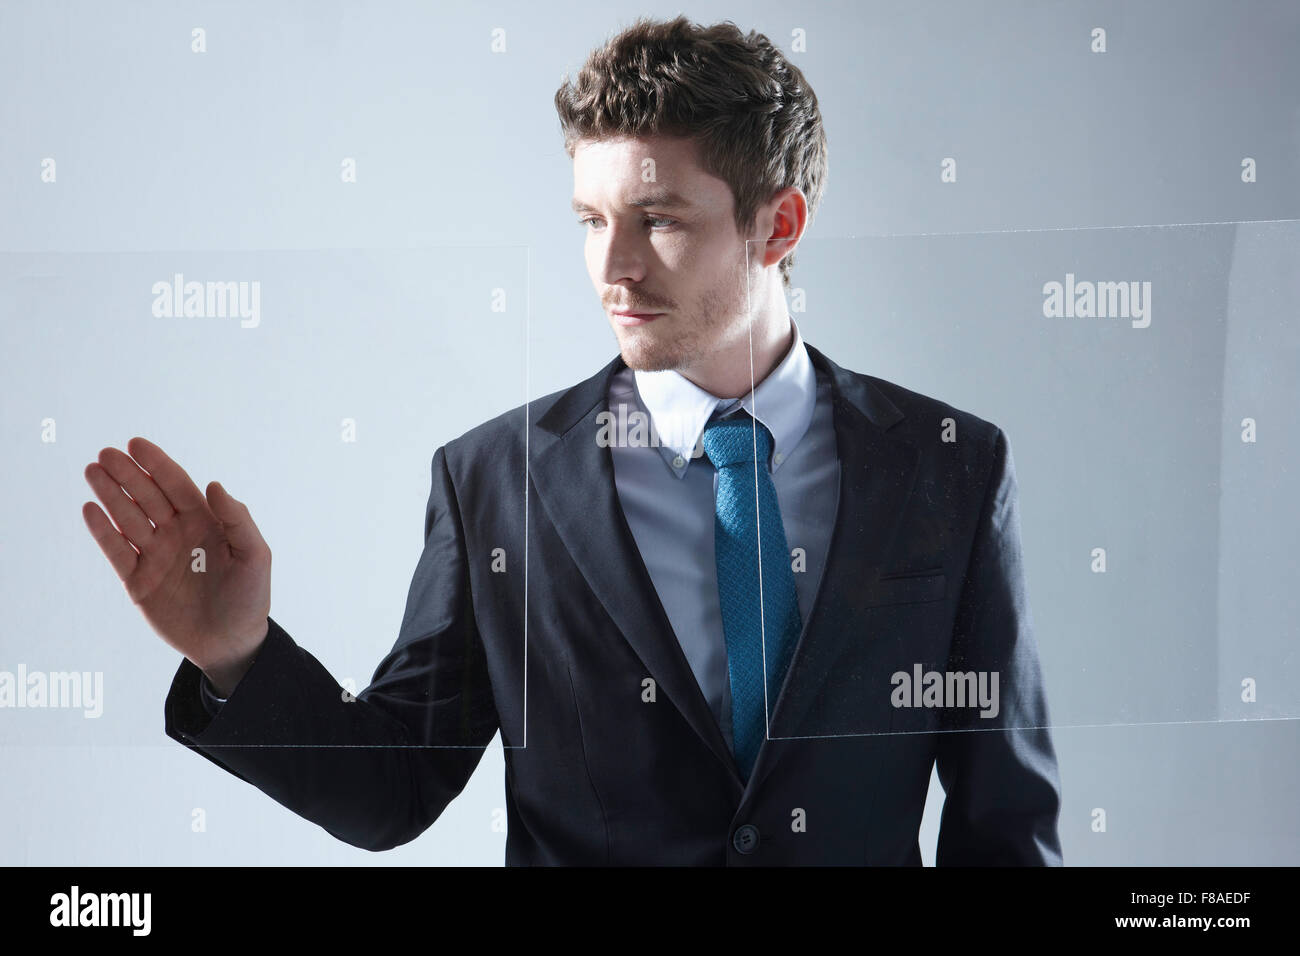 Business man working on touch screen with one hand Stock Photo